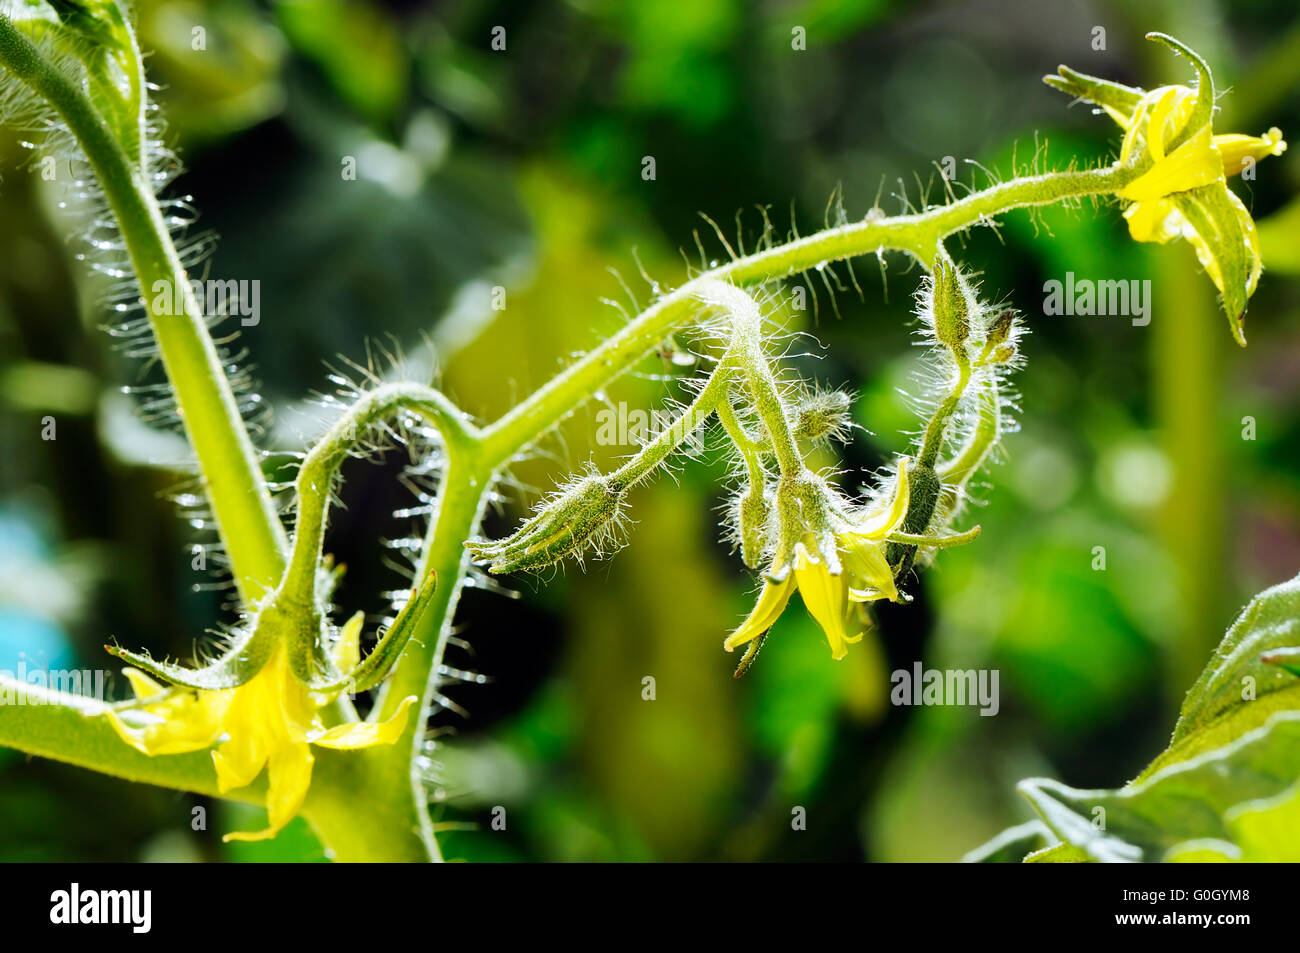 Bright yellow flowers of tomatoes over blurry background Stock Photo